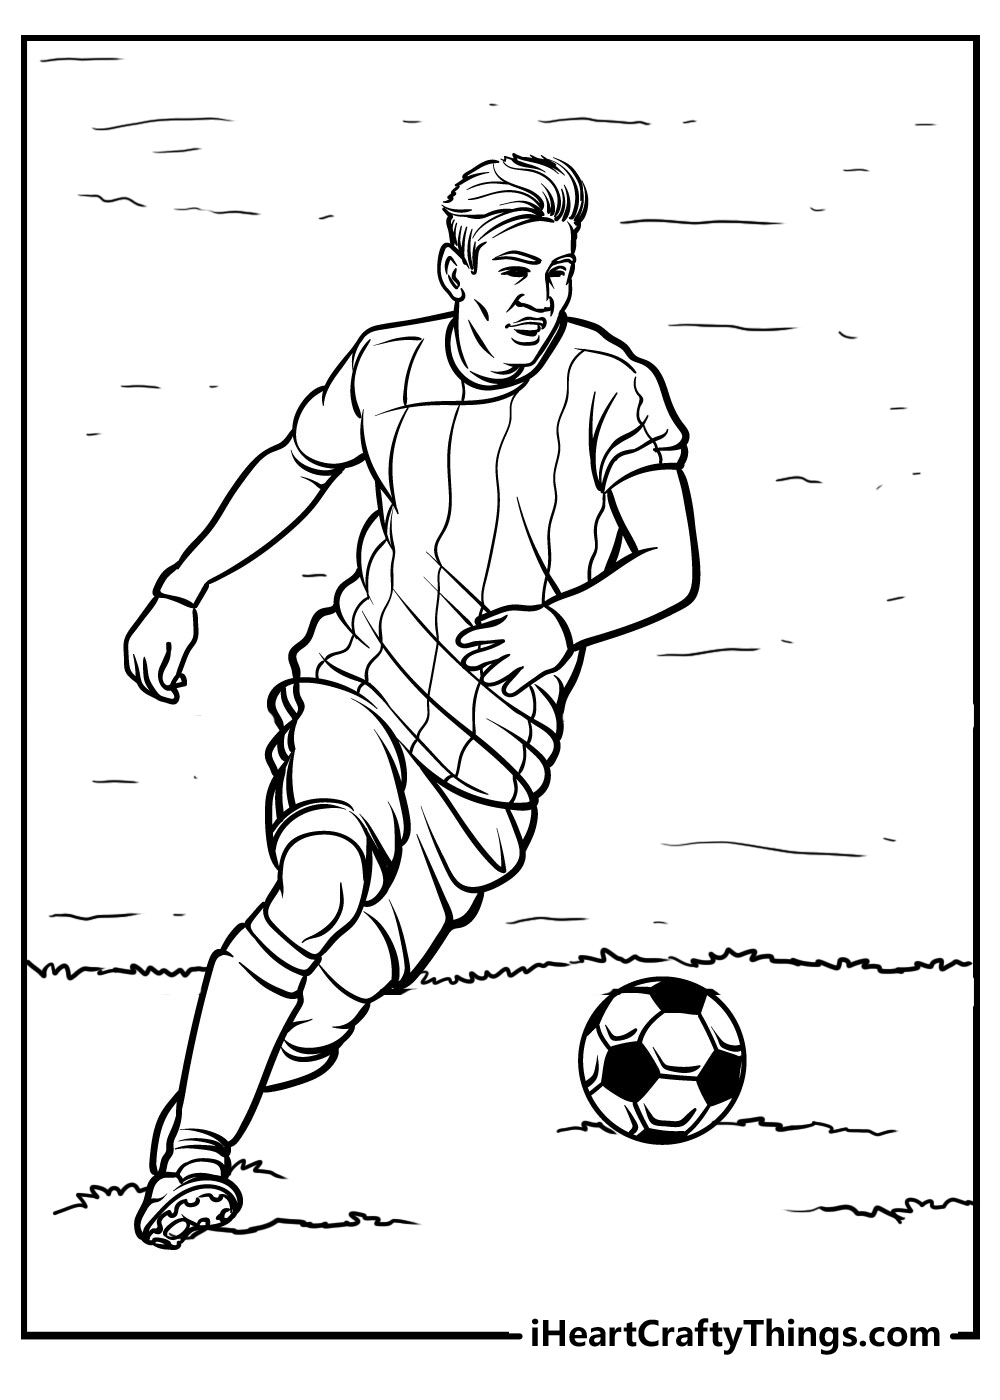 Football coloring pages free printables